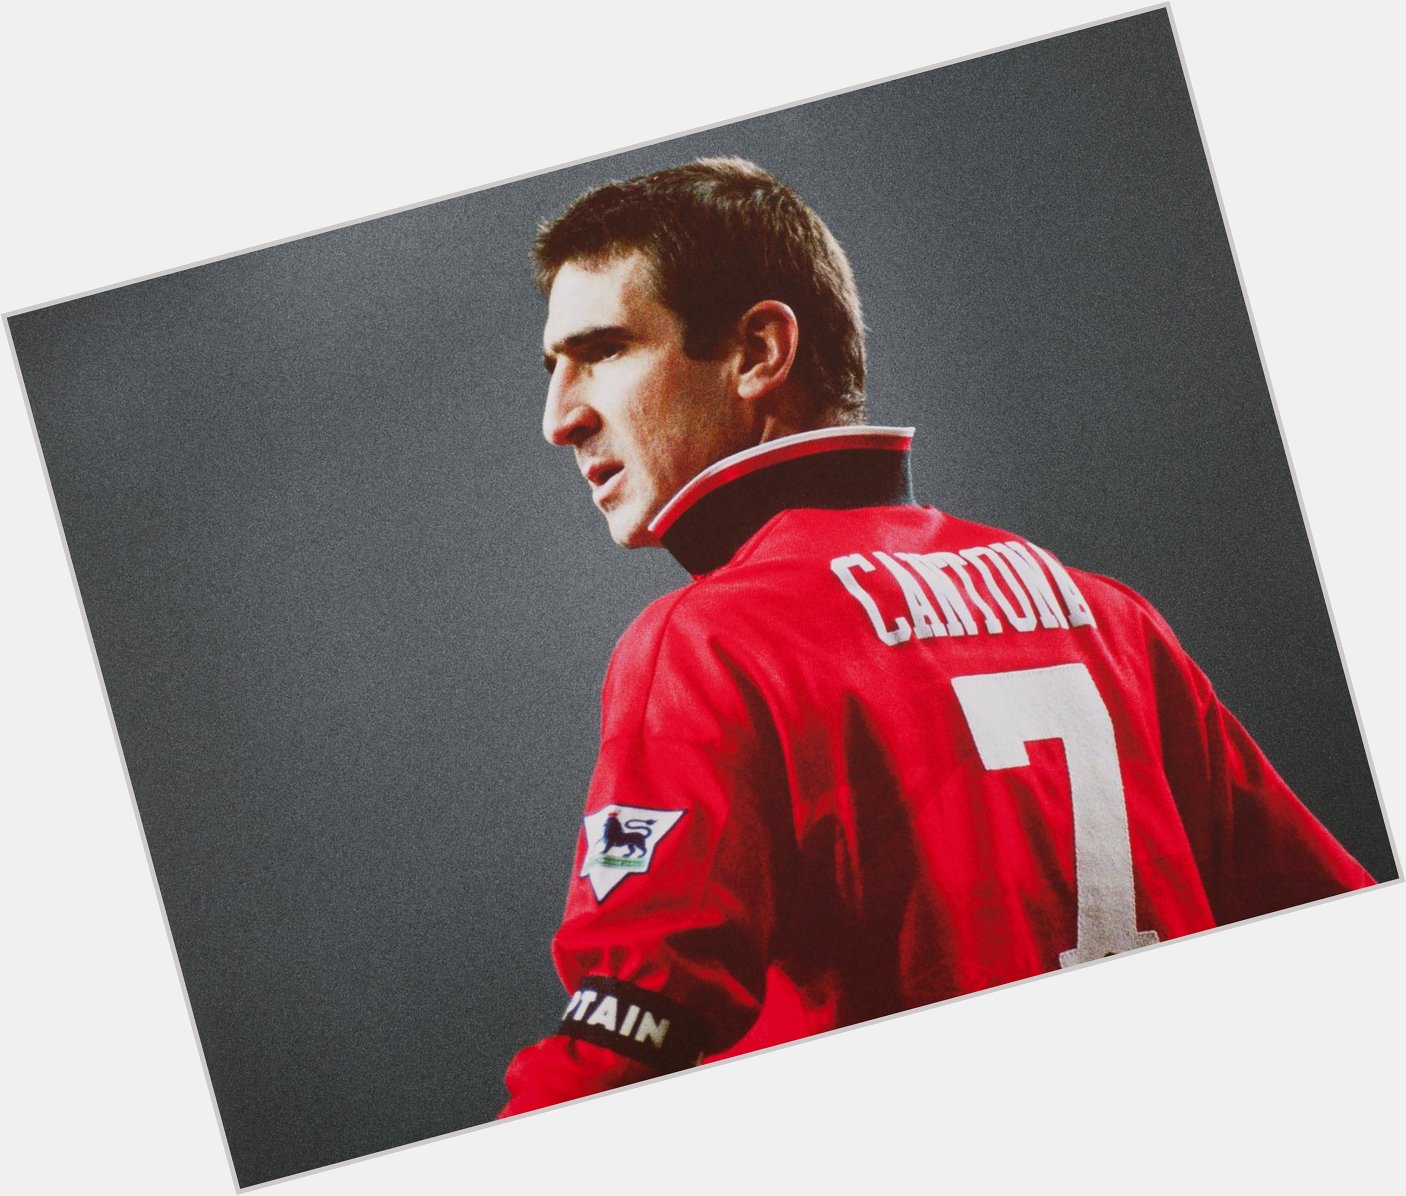  Wishing The King Eric Cantona a happy  birthday! The legend turns 51 today. 